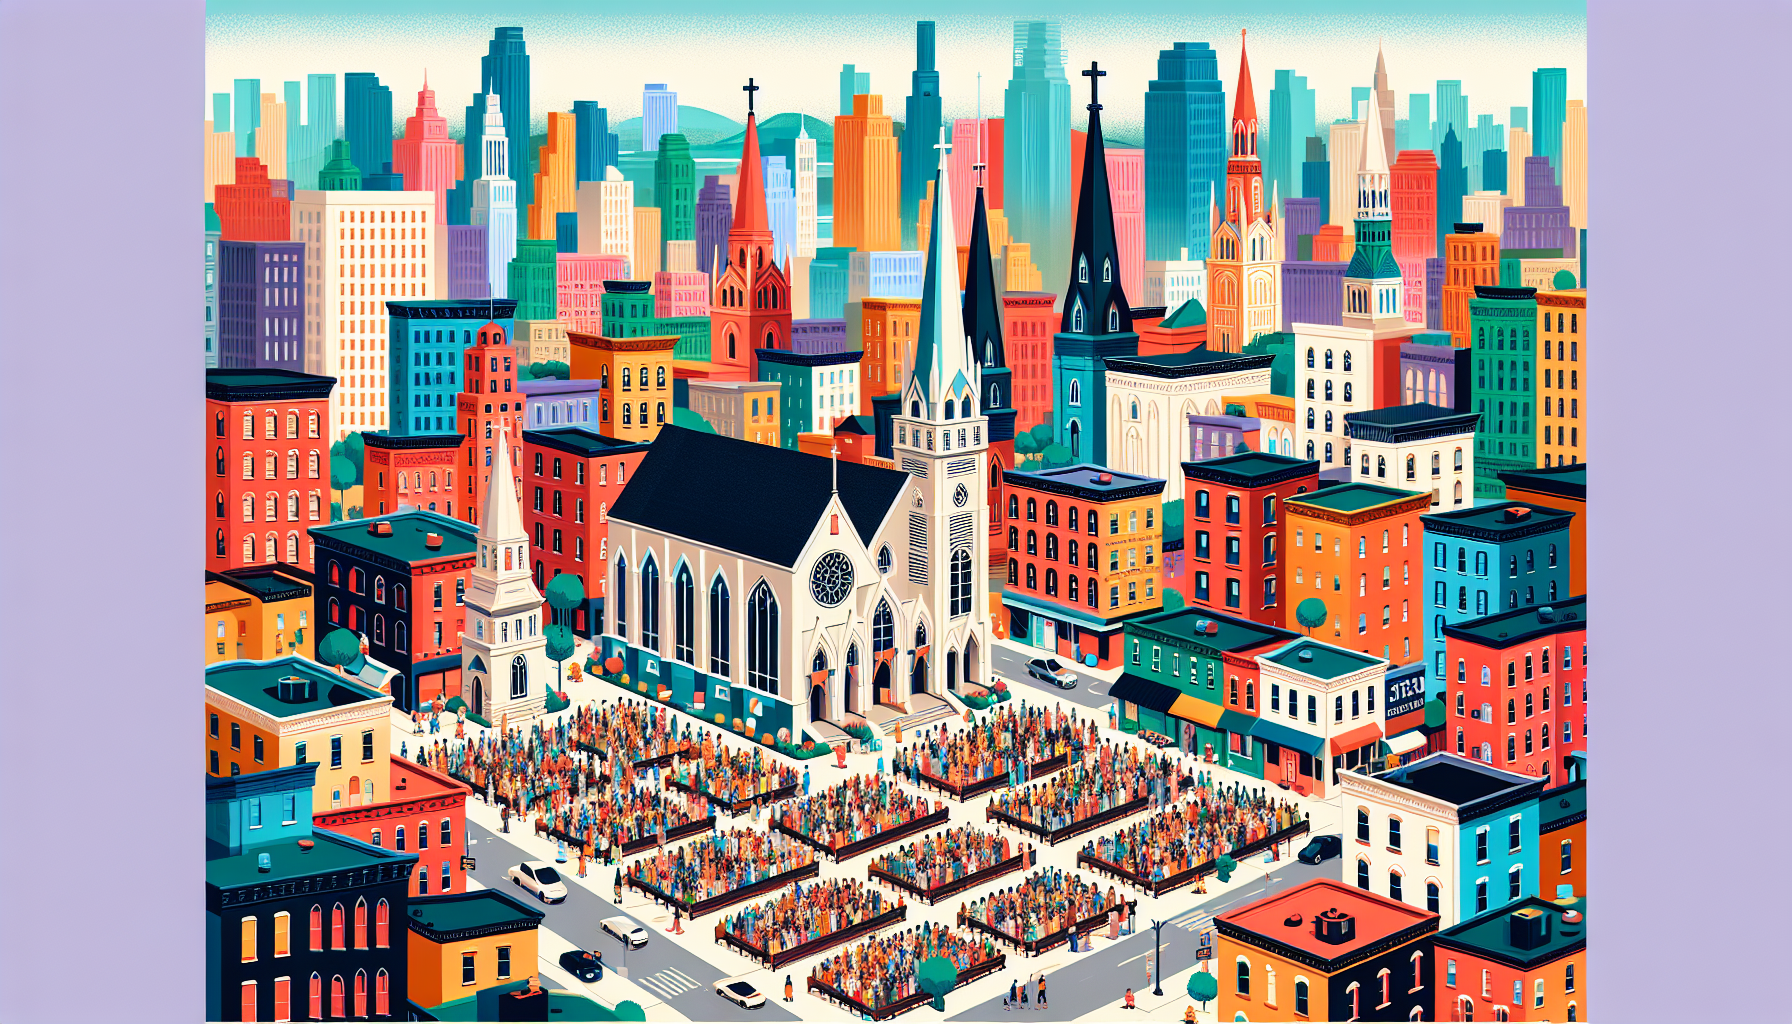 A picturesque illustration of diverse Christian churches in New York City, showcasing a vibrant community gathered for a multicultural service. The scene blends traditional and modern church architect